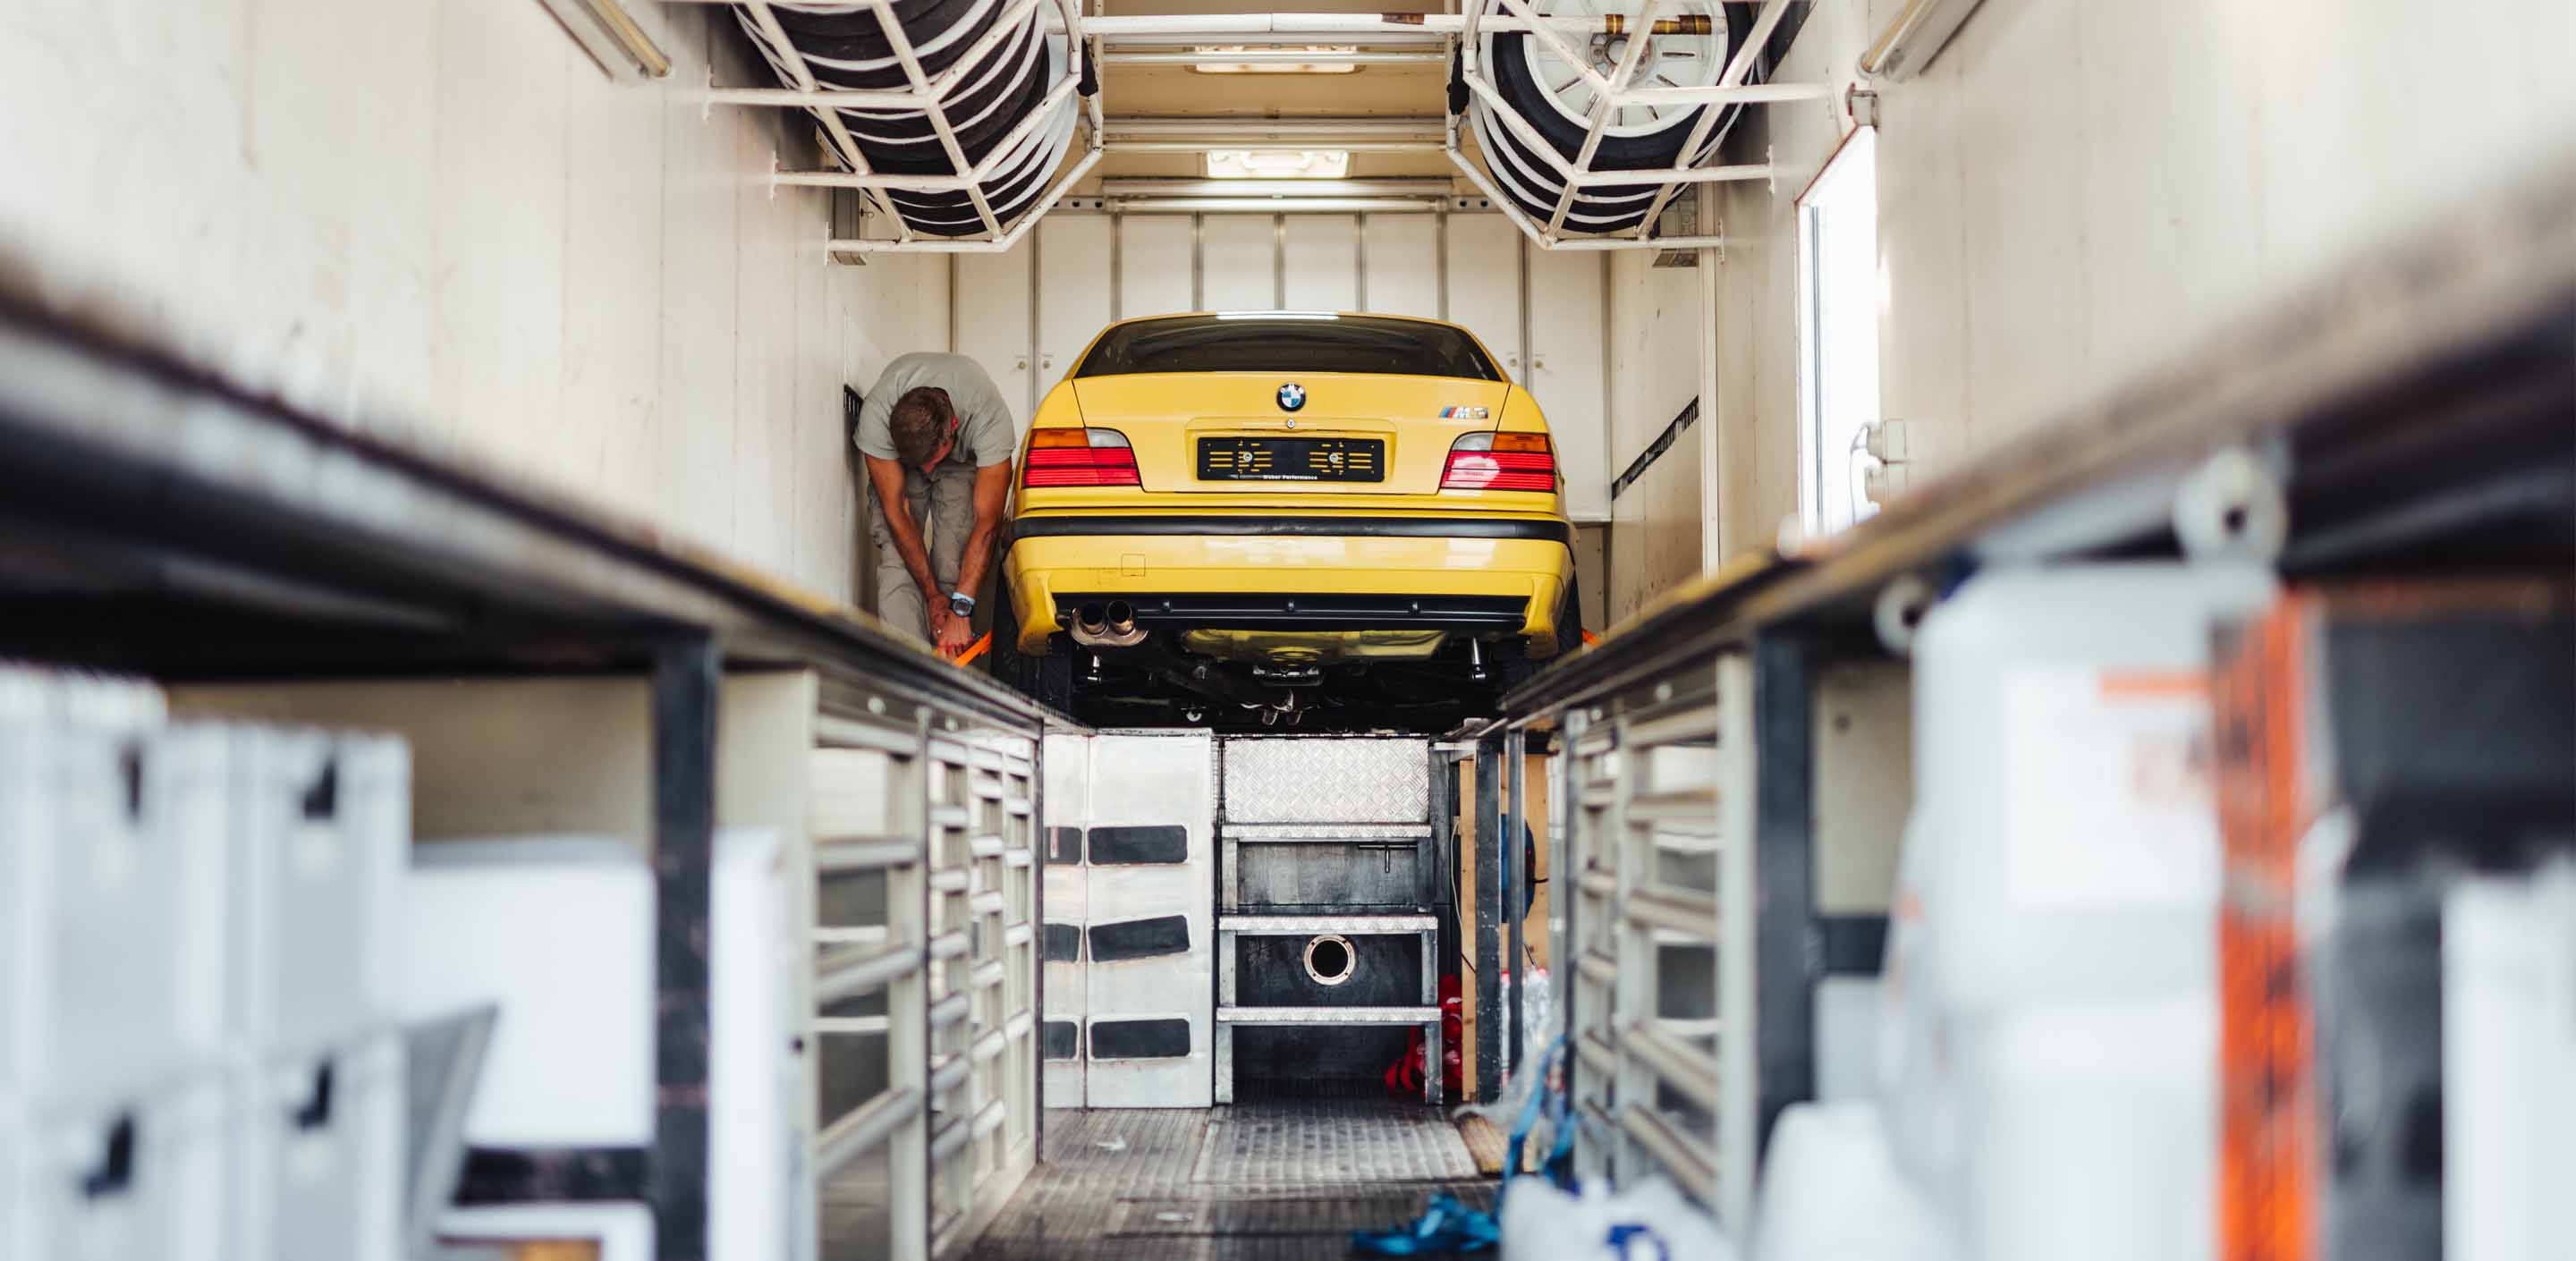 A BMW E36 M3 in a trailer during a GP Days Open Pitlane Track Day at Circuit Diijon Prenois